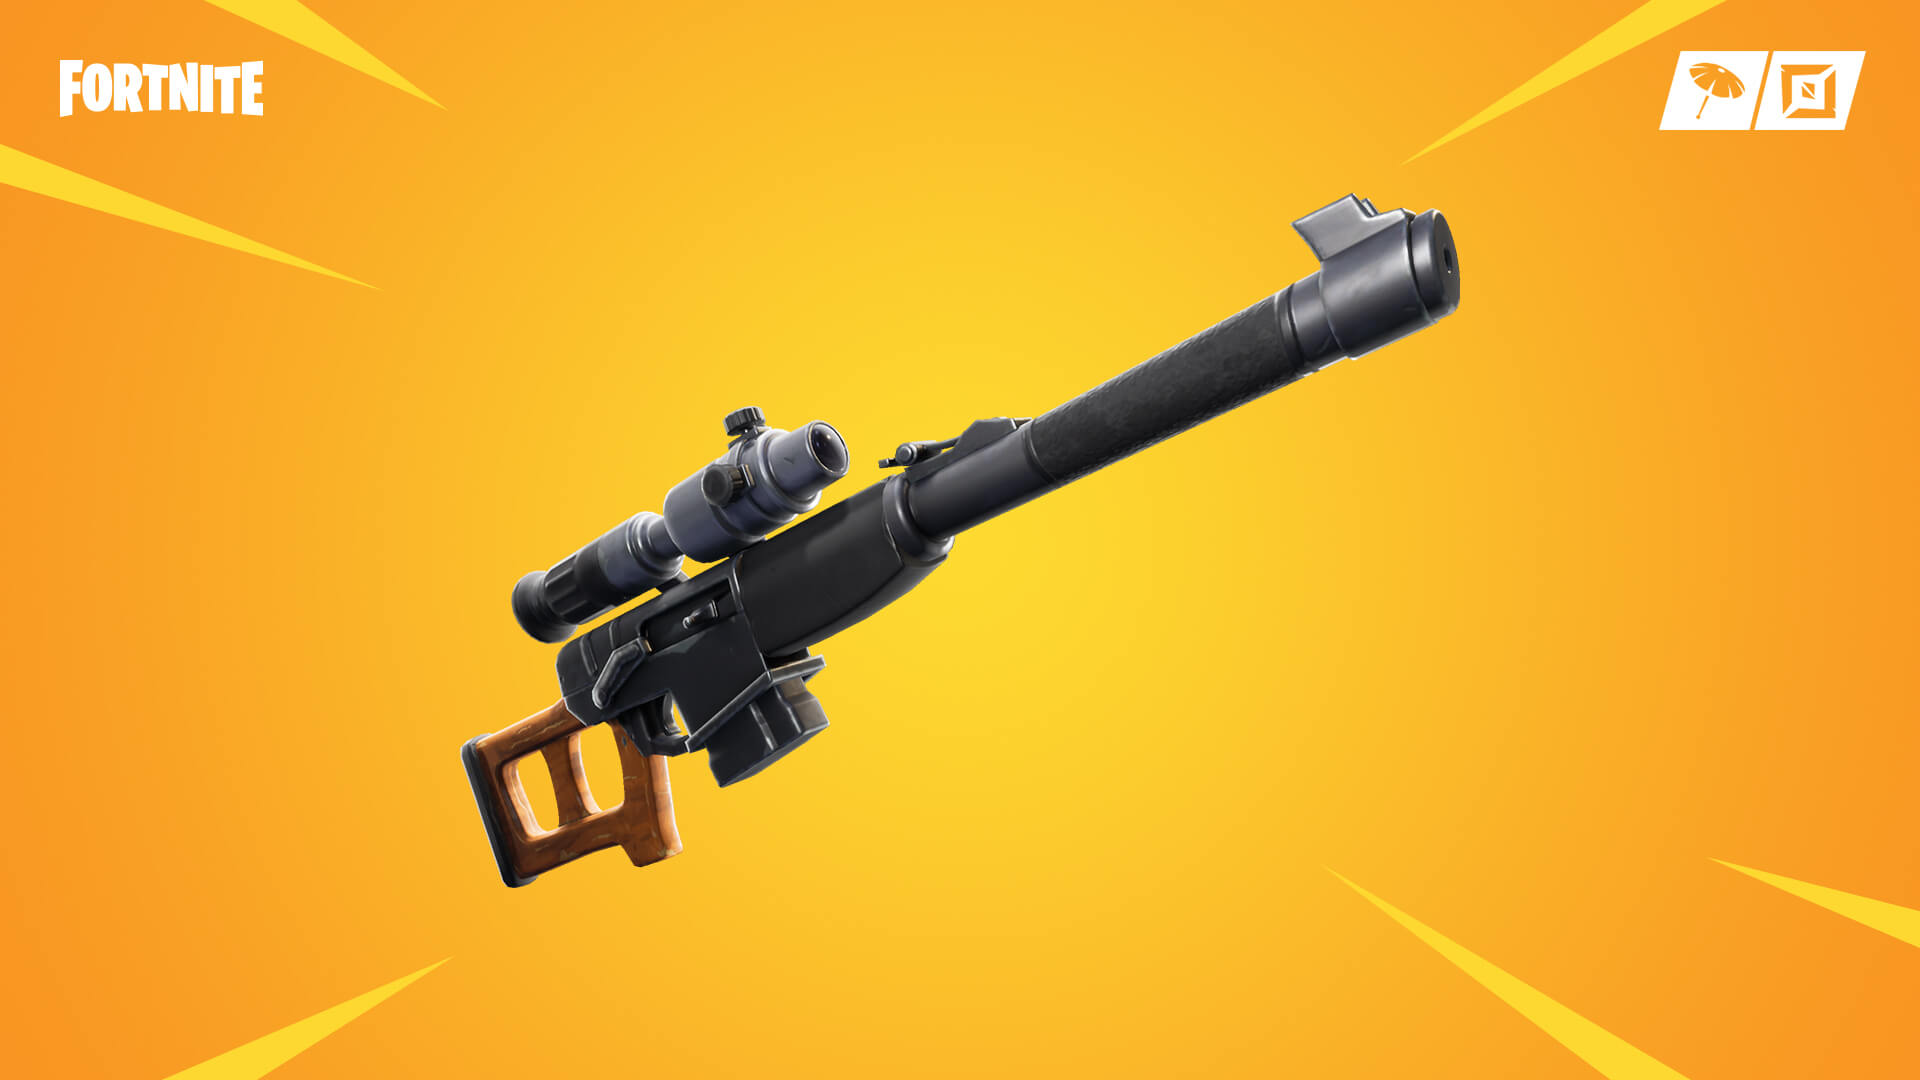 Image for Fortnite v10.00 content update adds Rift Zones, Automatic Sniper Rifle and Arsenal LTM